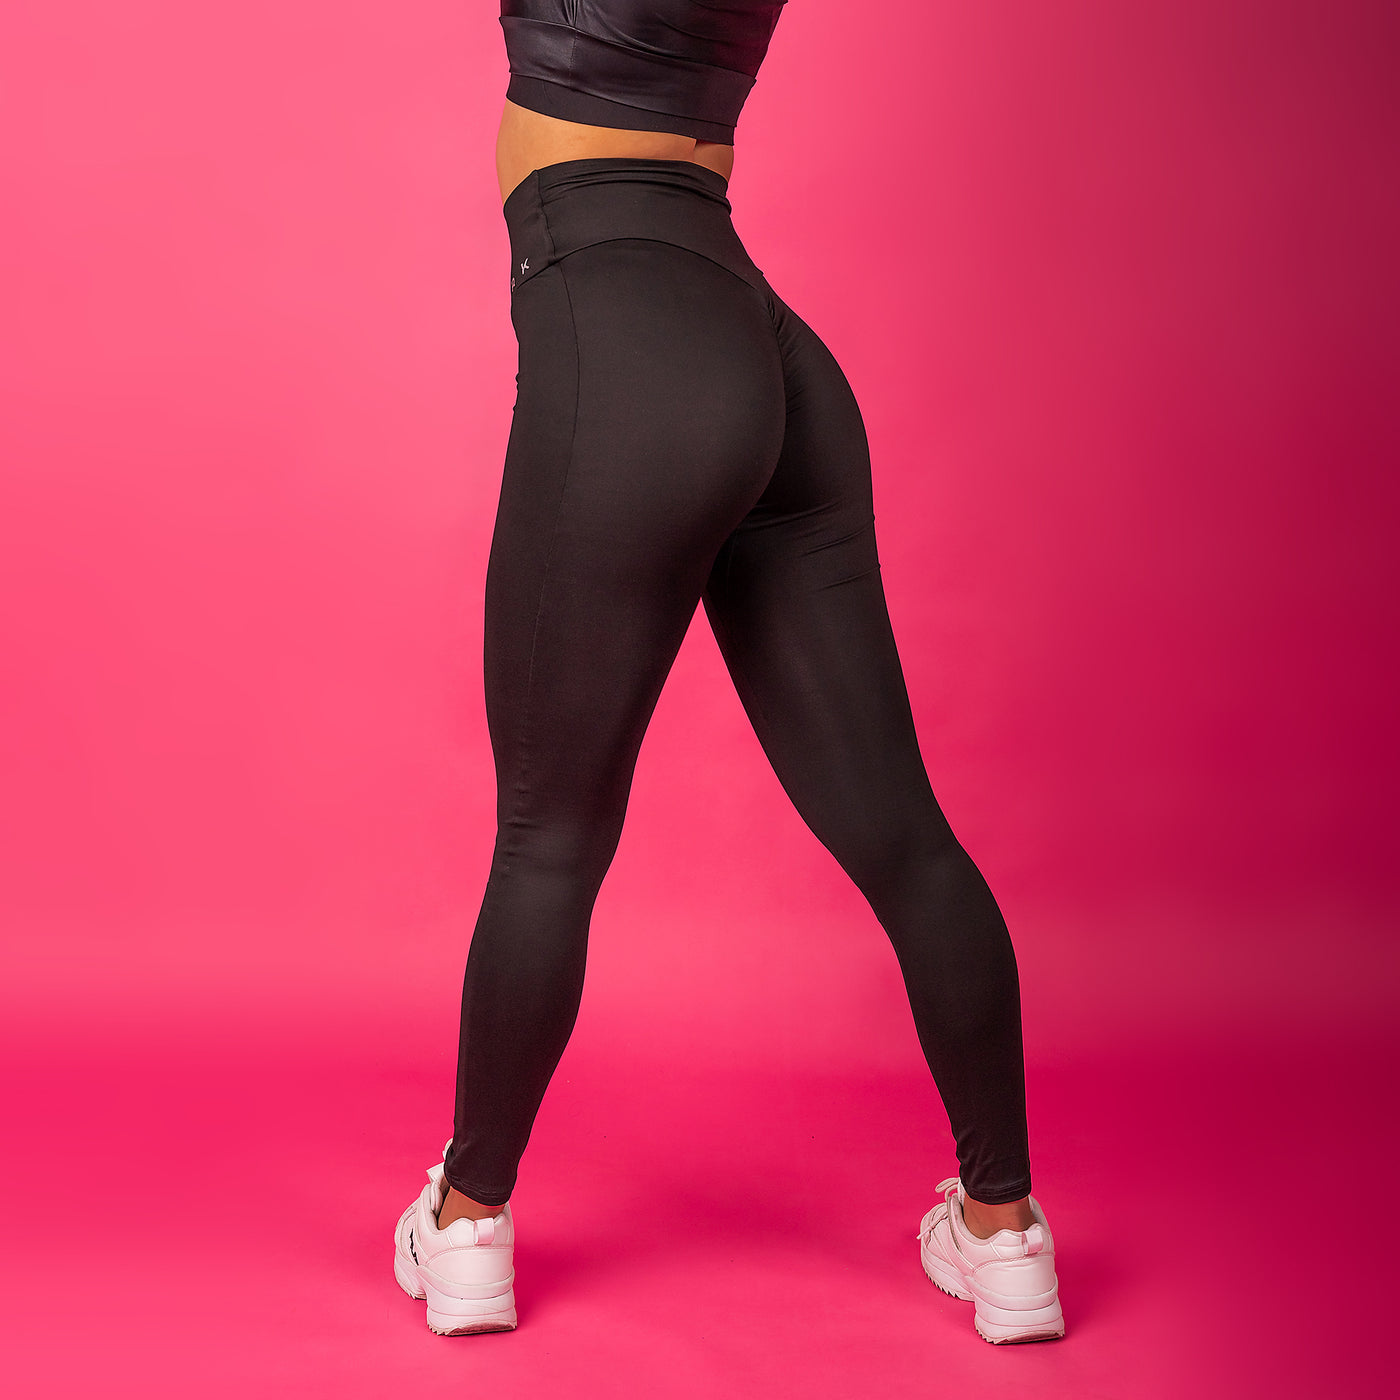 Perfect Ass In Black Yoga Pants 1